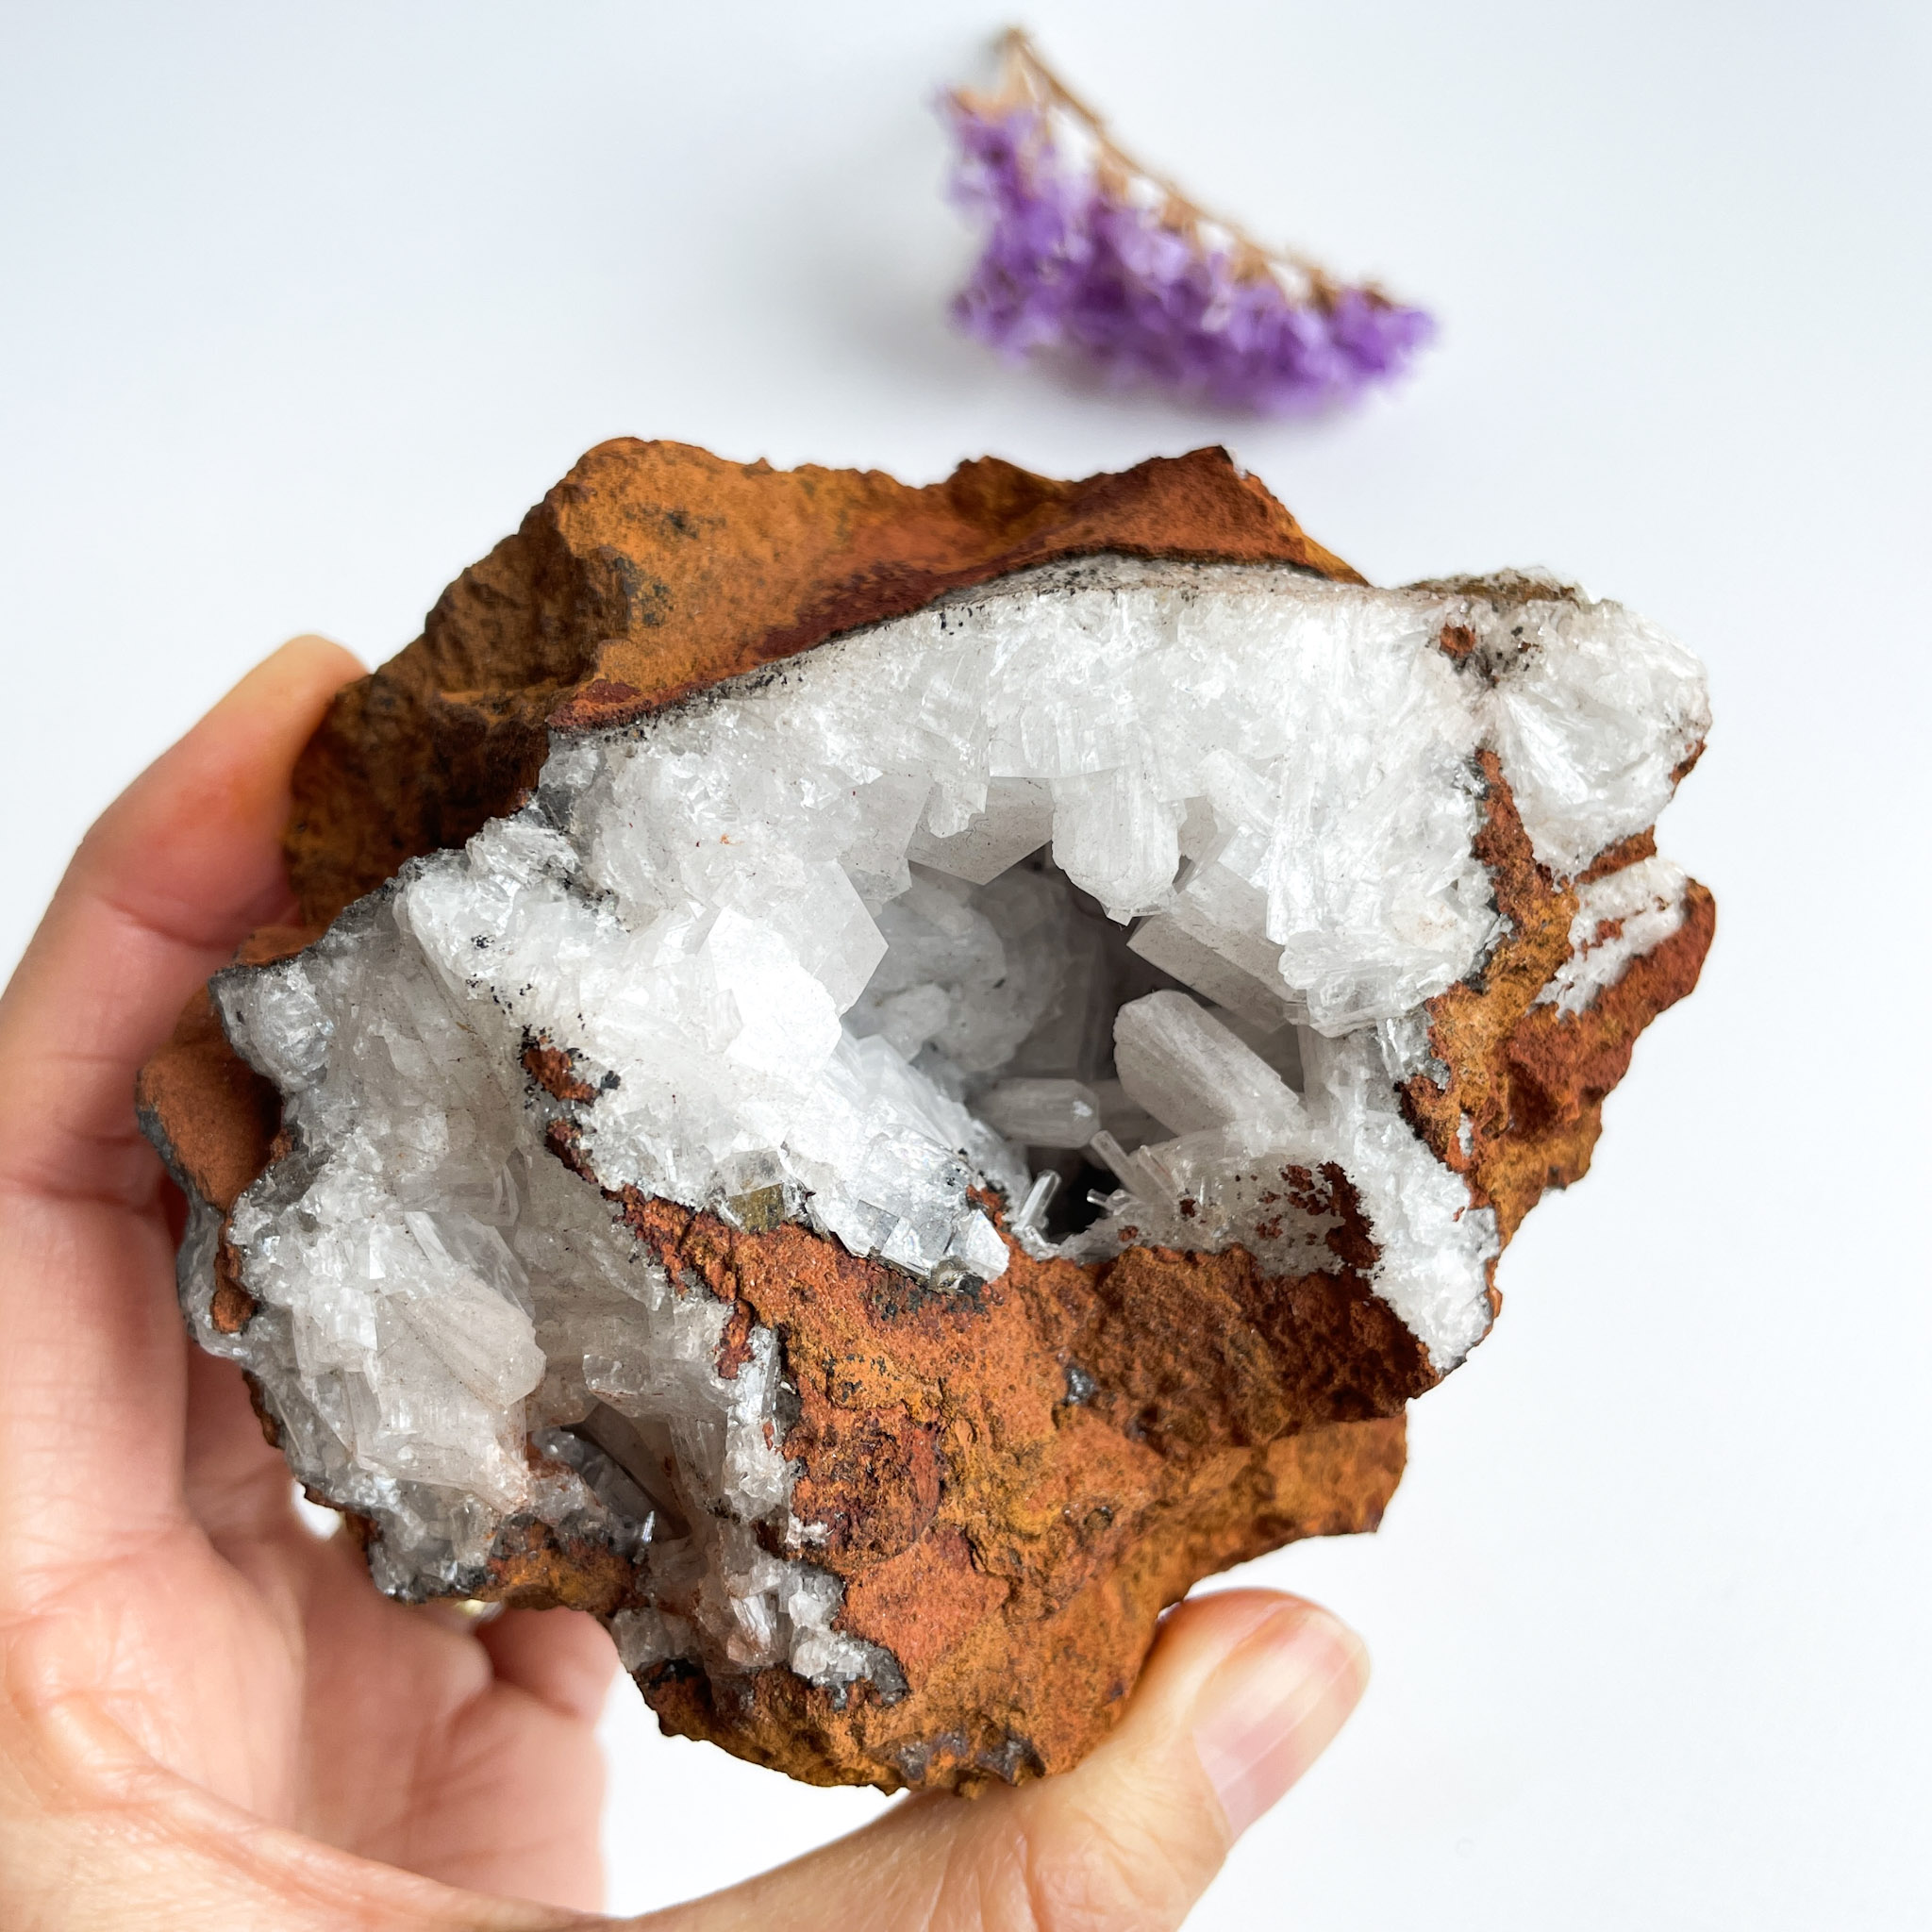 A person's hand holding a geode with quartz crystals inside, against a white background with a small purple amethyst cluster visible in the upper right corner.